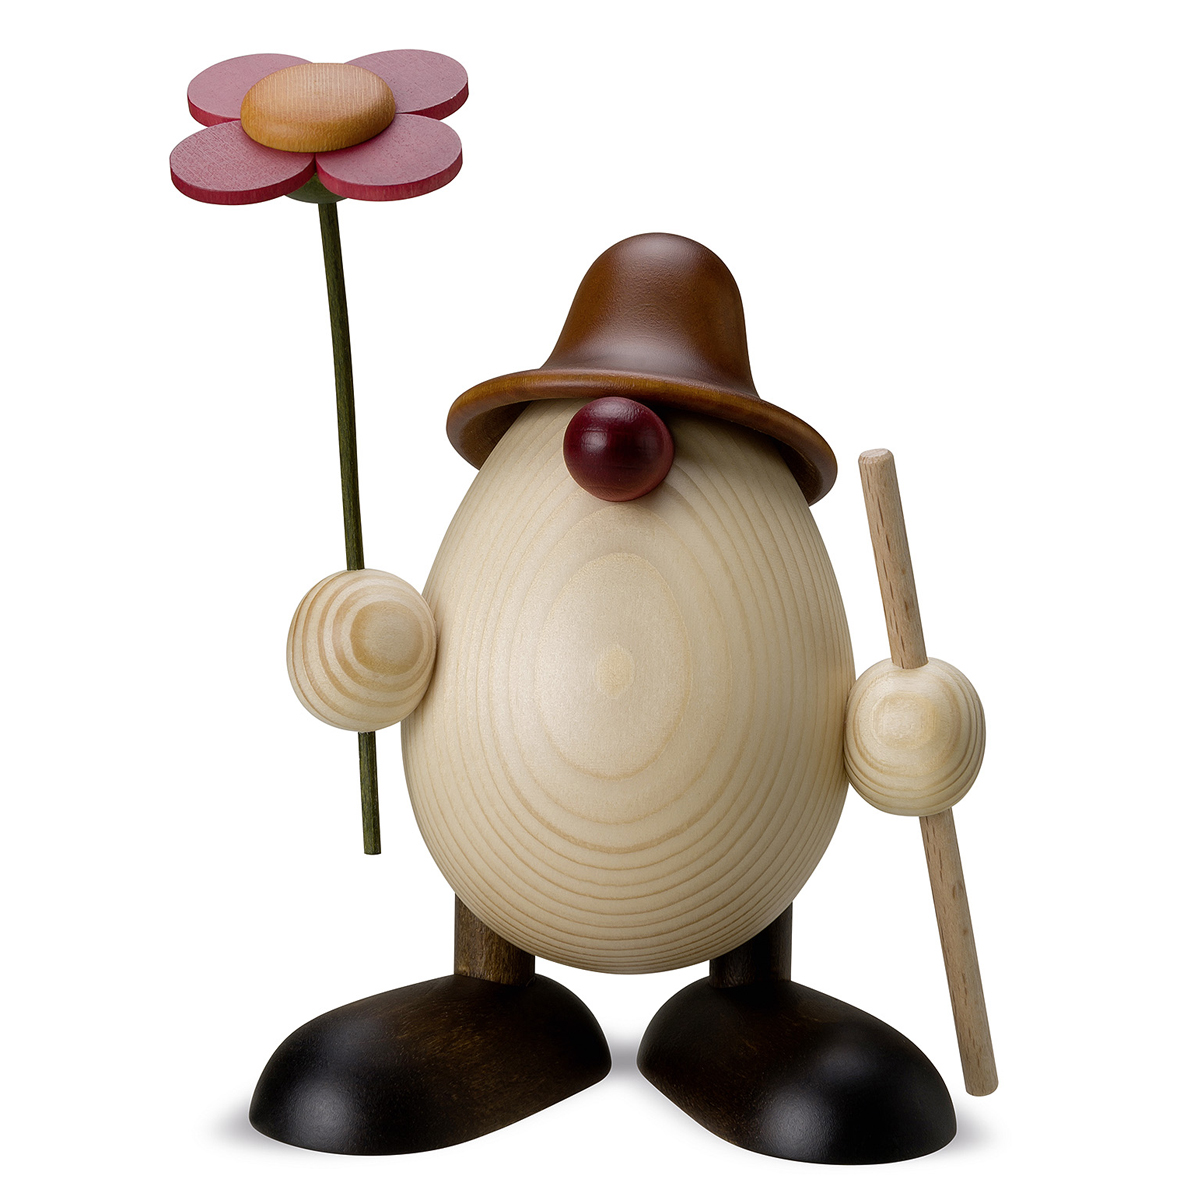 Egghead Rudi with flower and stick, brown